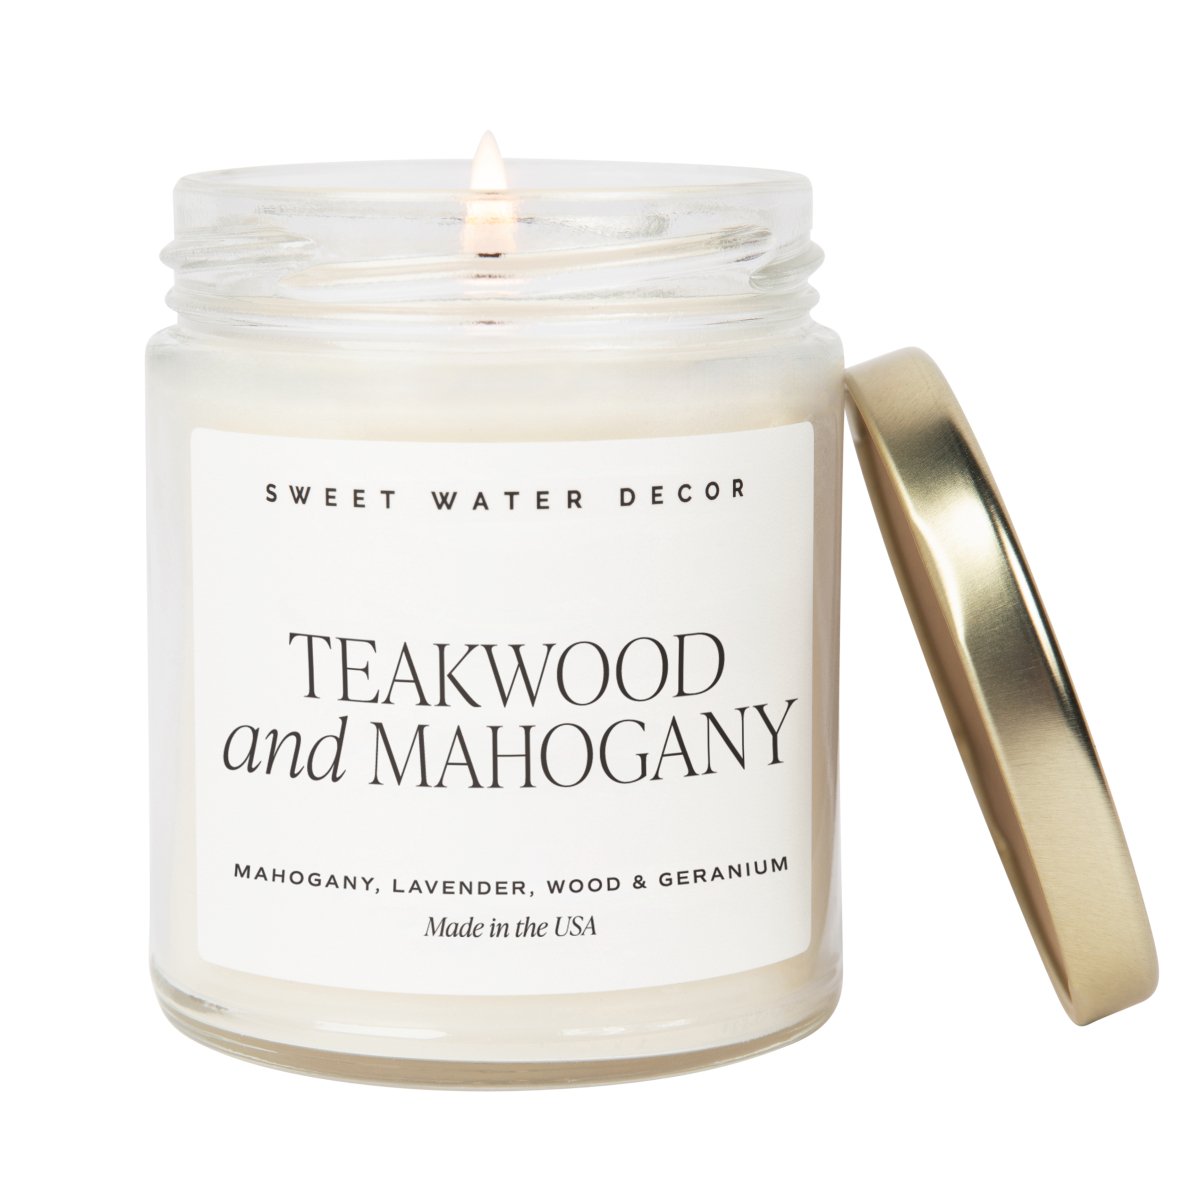 Sweet Water Decor Teakwood and Mahogany Soy Candle - Clear Jar - 9 oz - lily & onyx